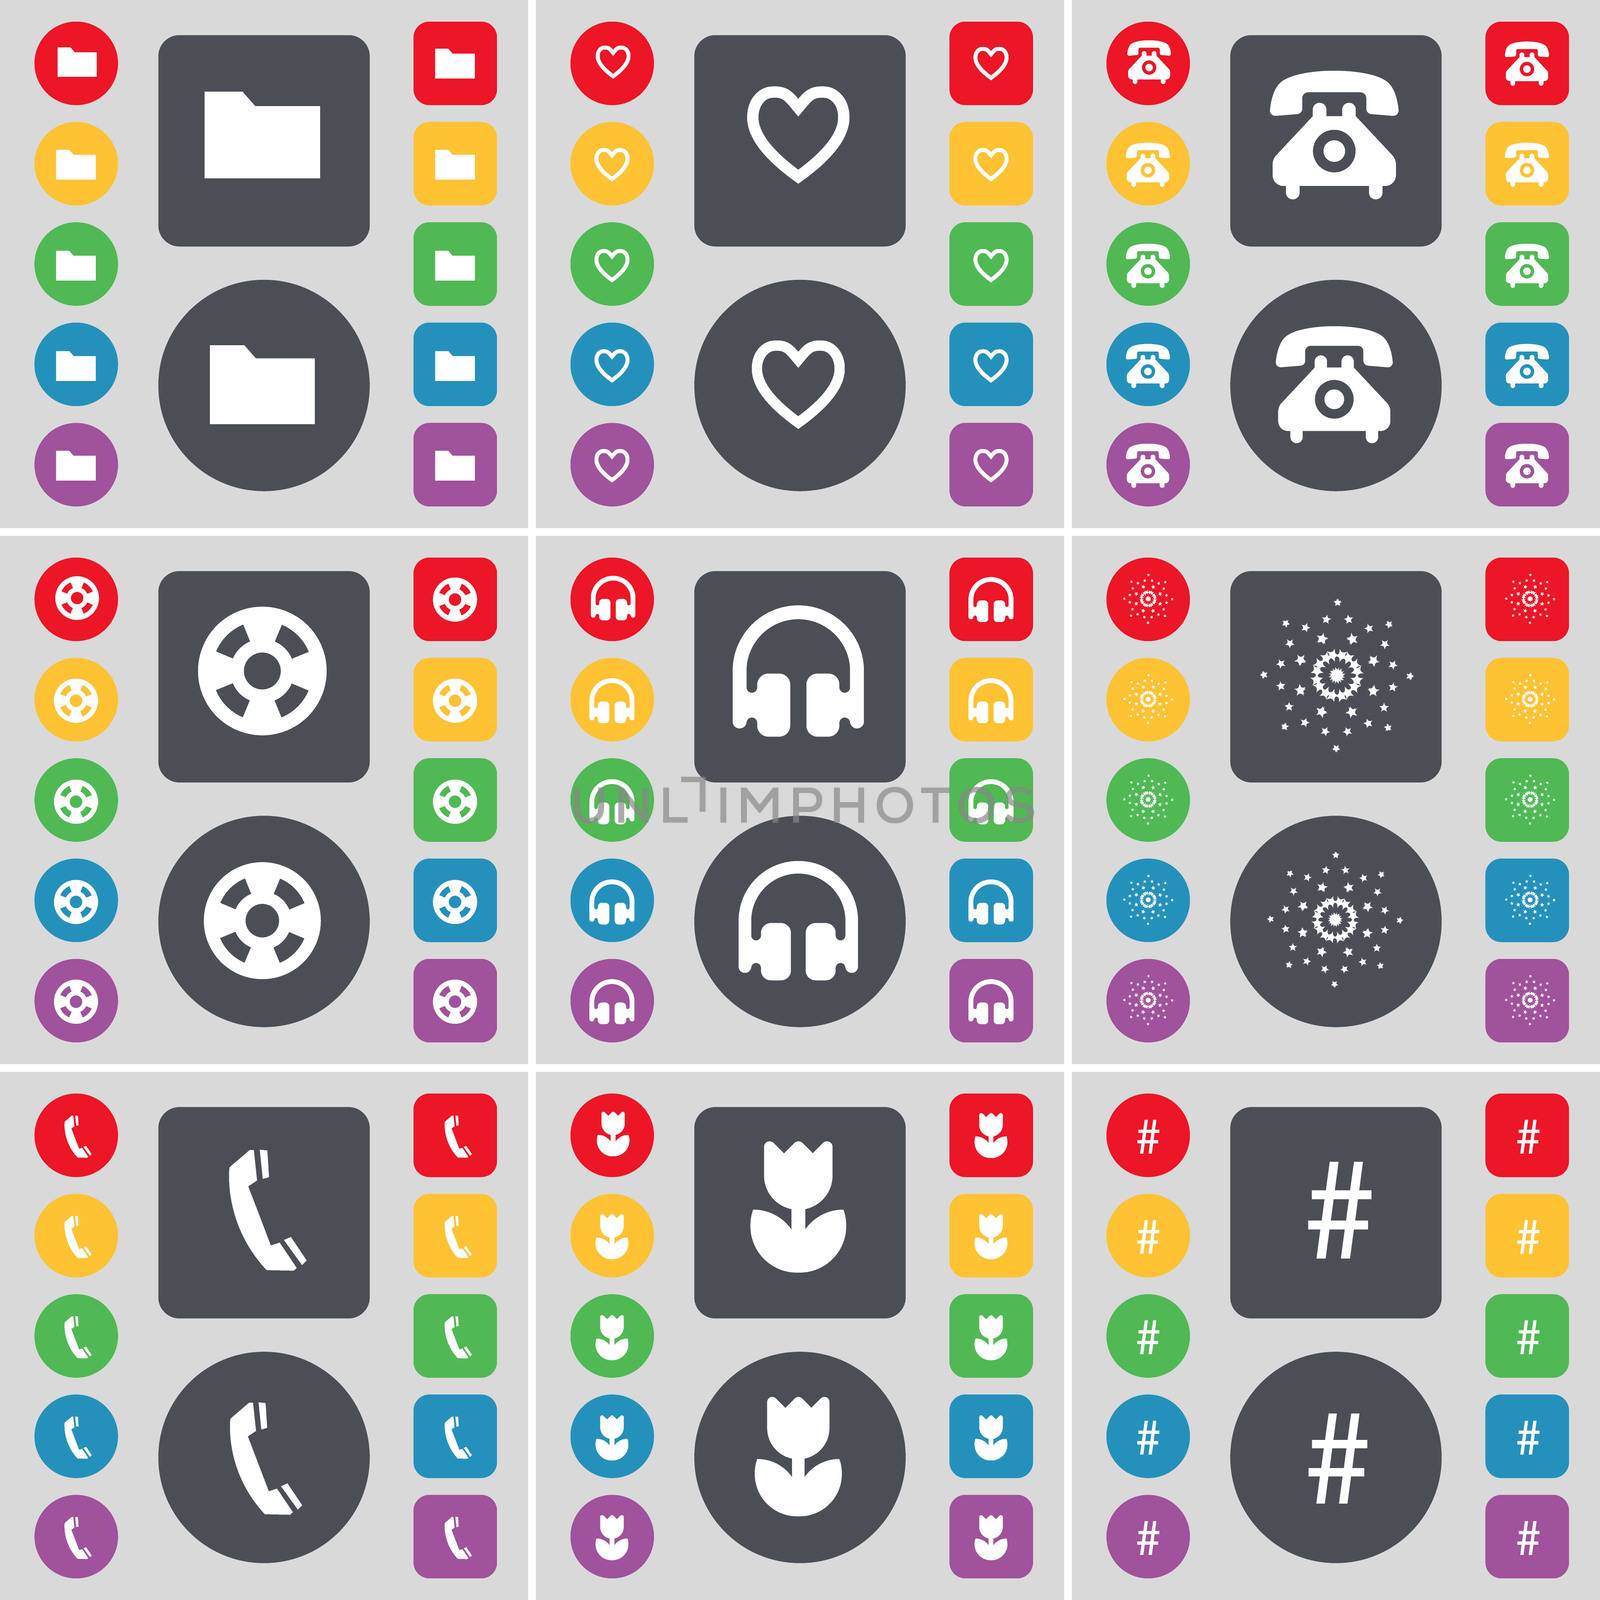 Folder, Heart, Retro phone, Videotape, Headphones, Star, Receiver, Flower, Hashtag icon symbol. A large set of flat, colored buttons for your design. illustration